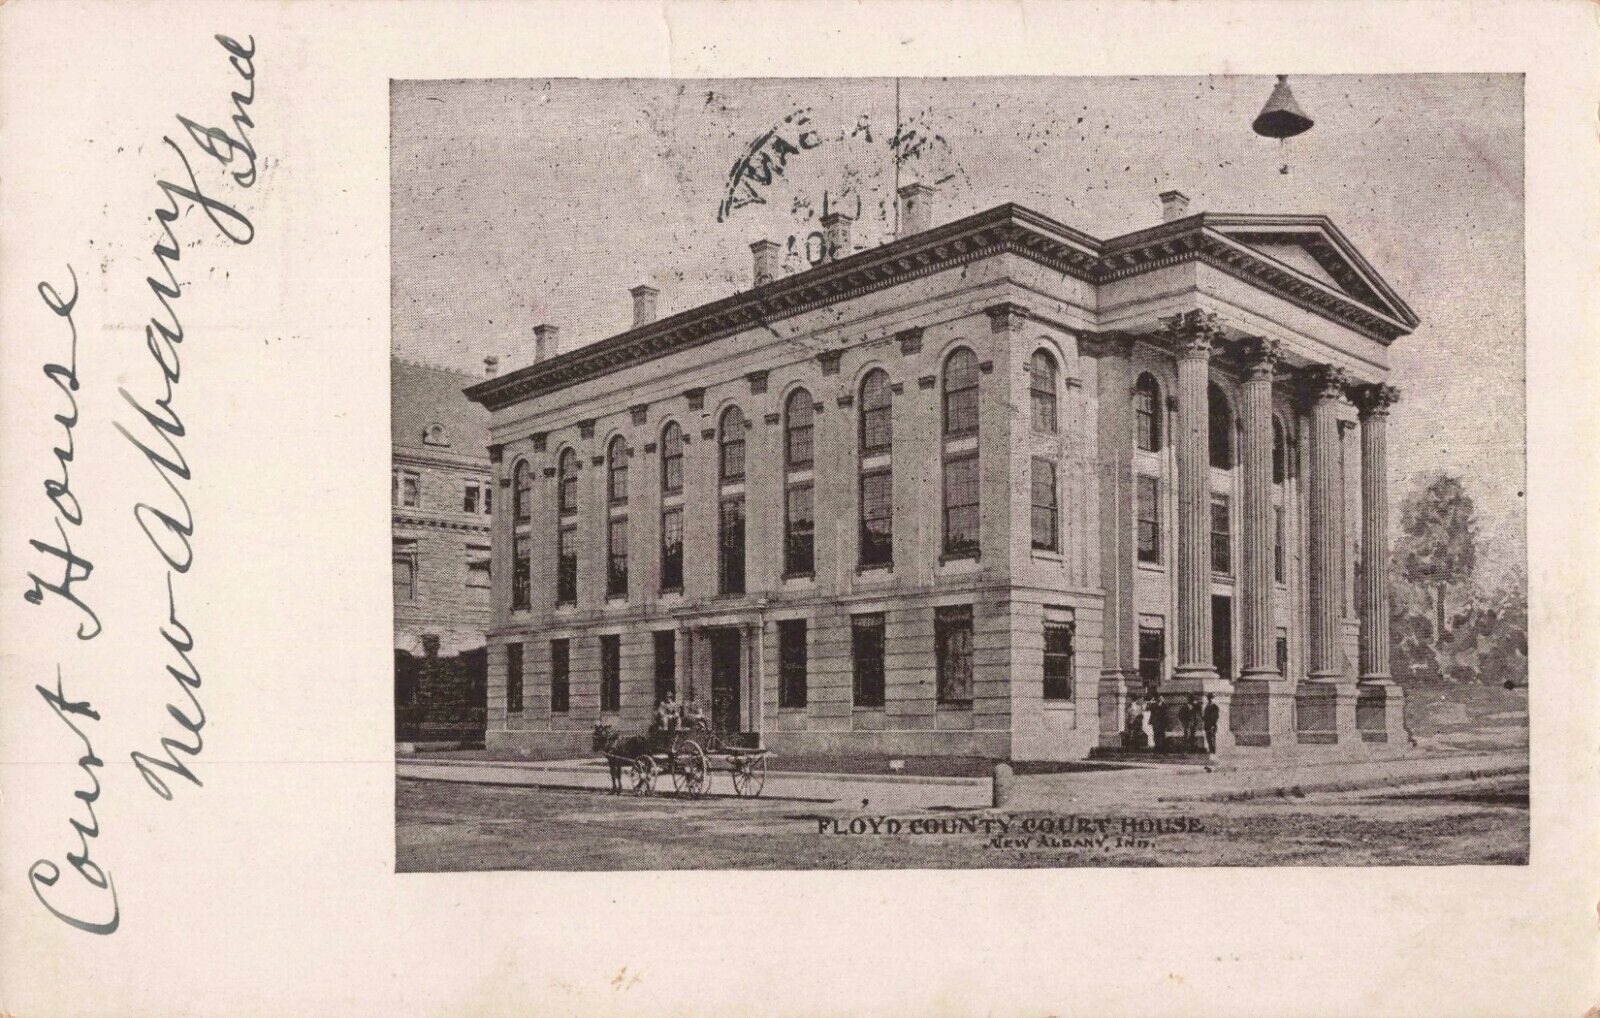 Floyd County Court House New Albany Indiana IN c1905 Postcard